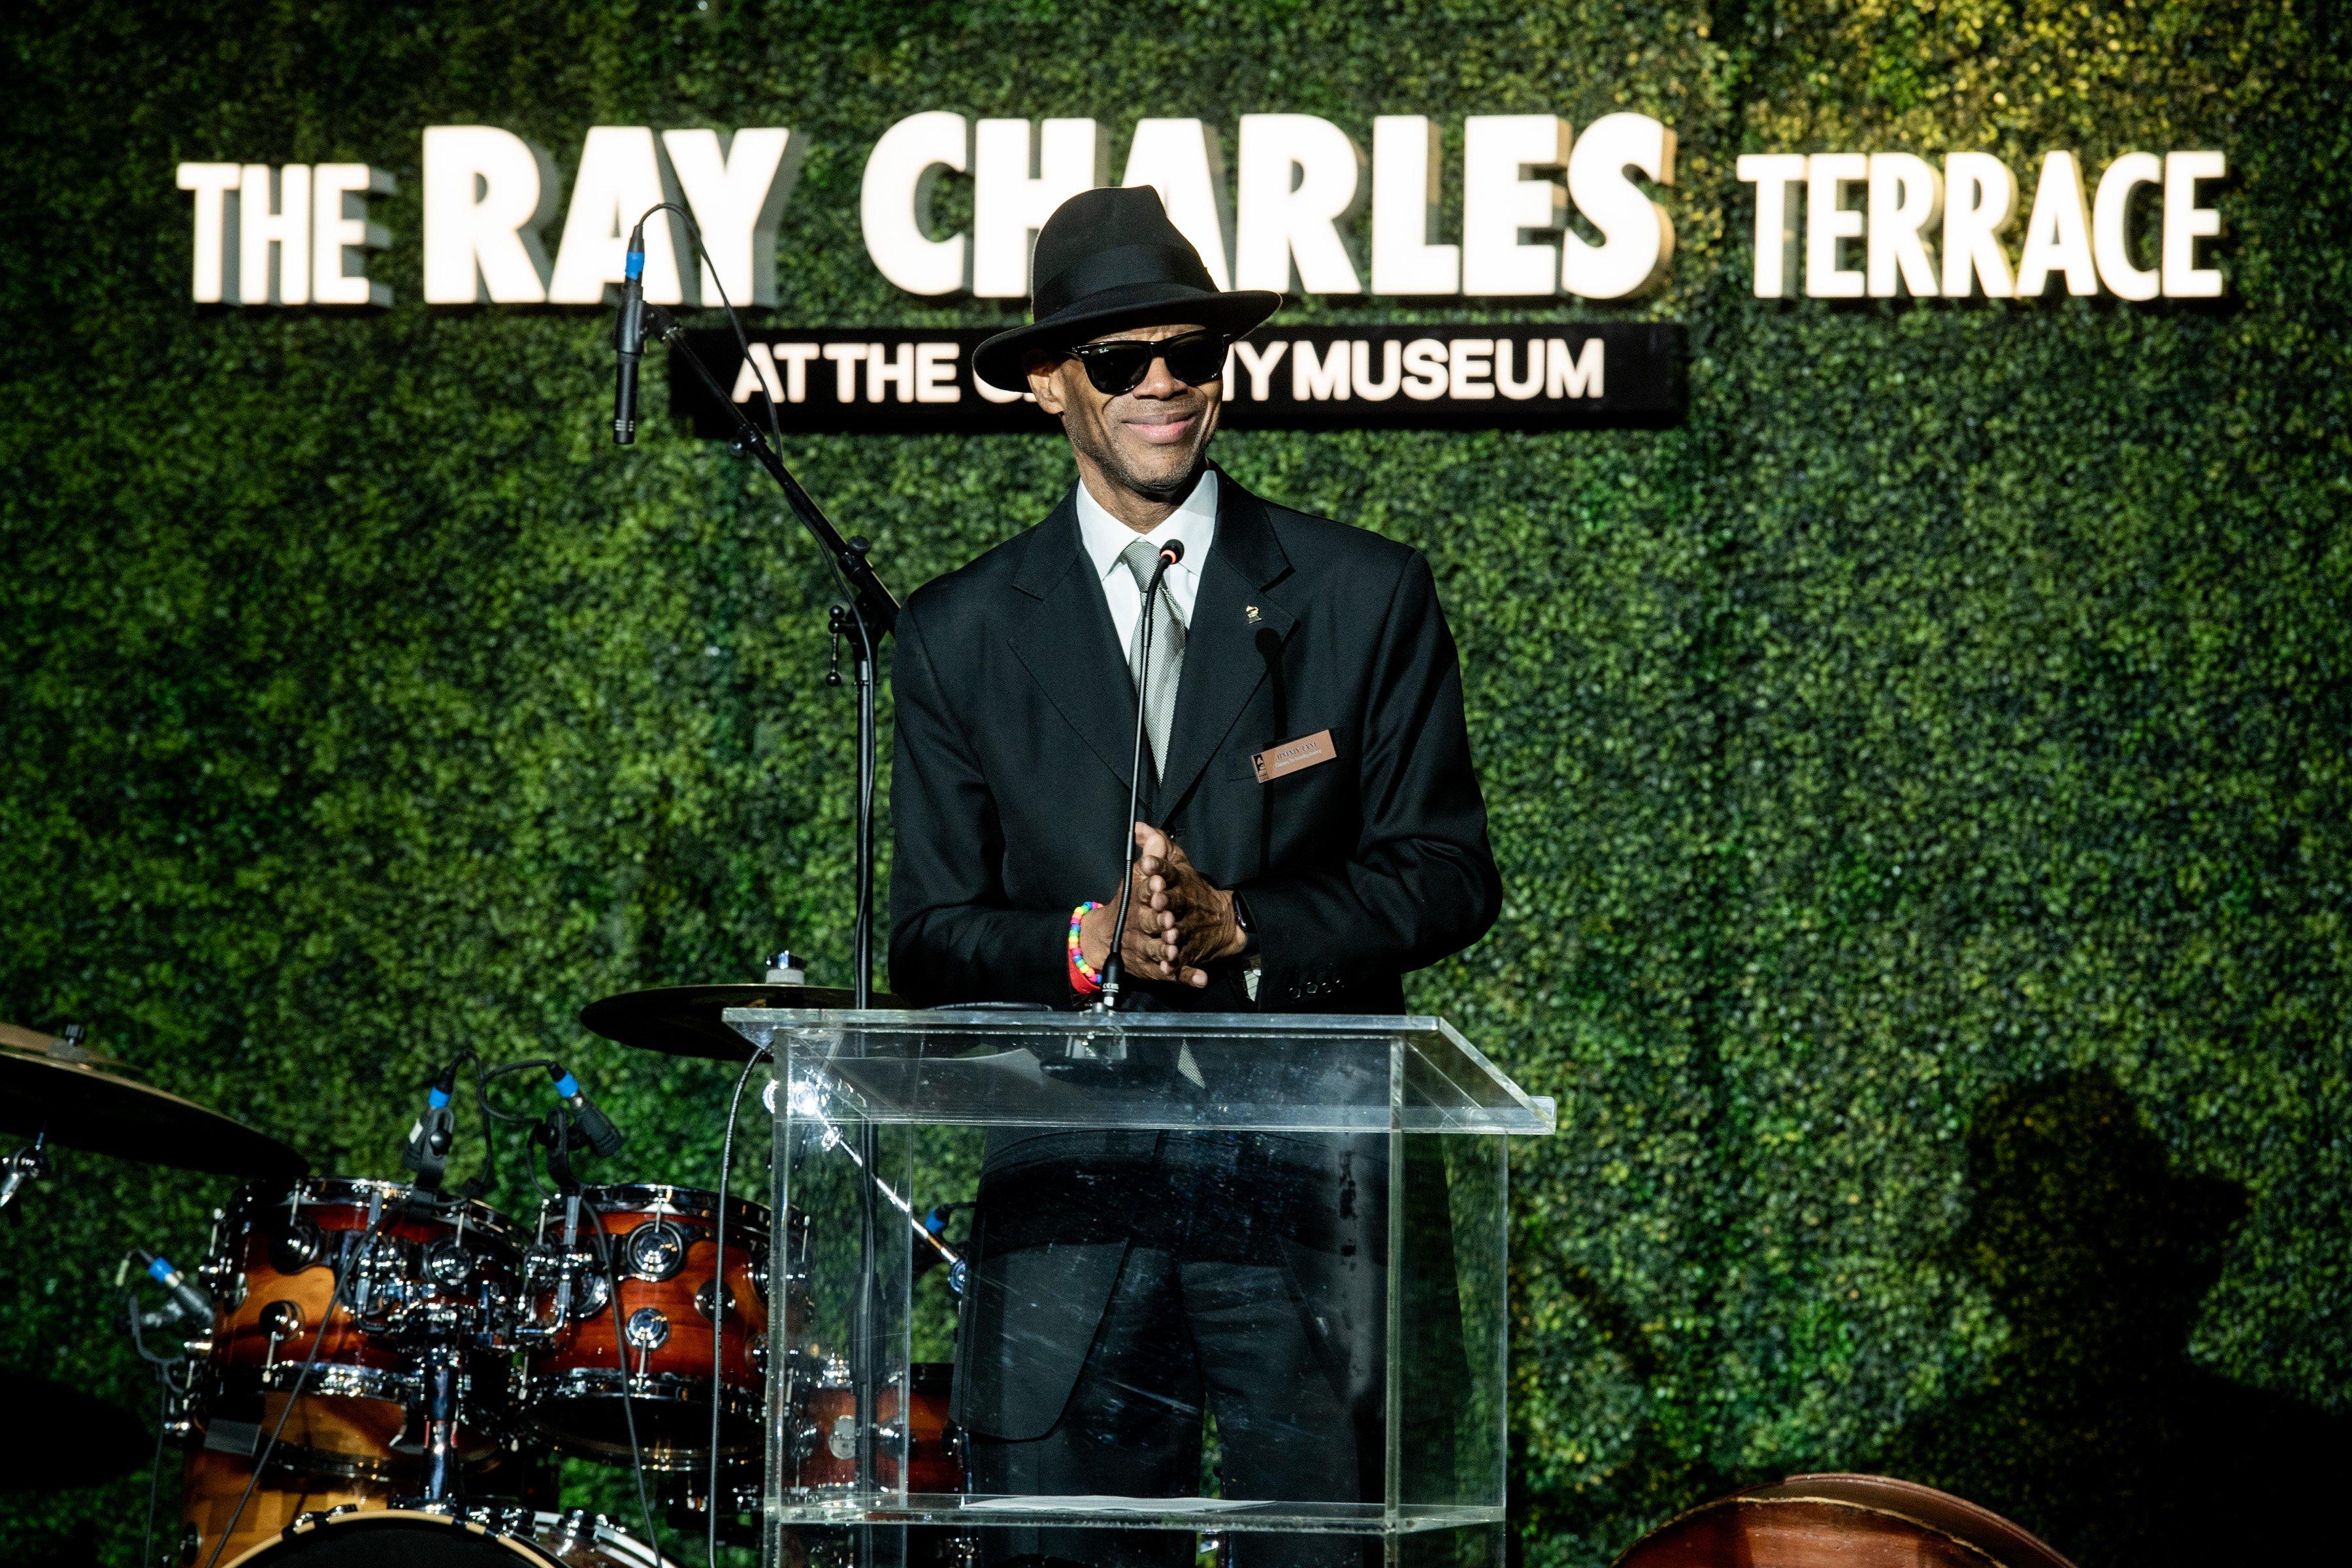 GRAMMY Museum Inaugurates Ray Charles Terrace featuring Jimmy Jam